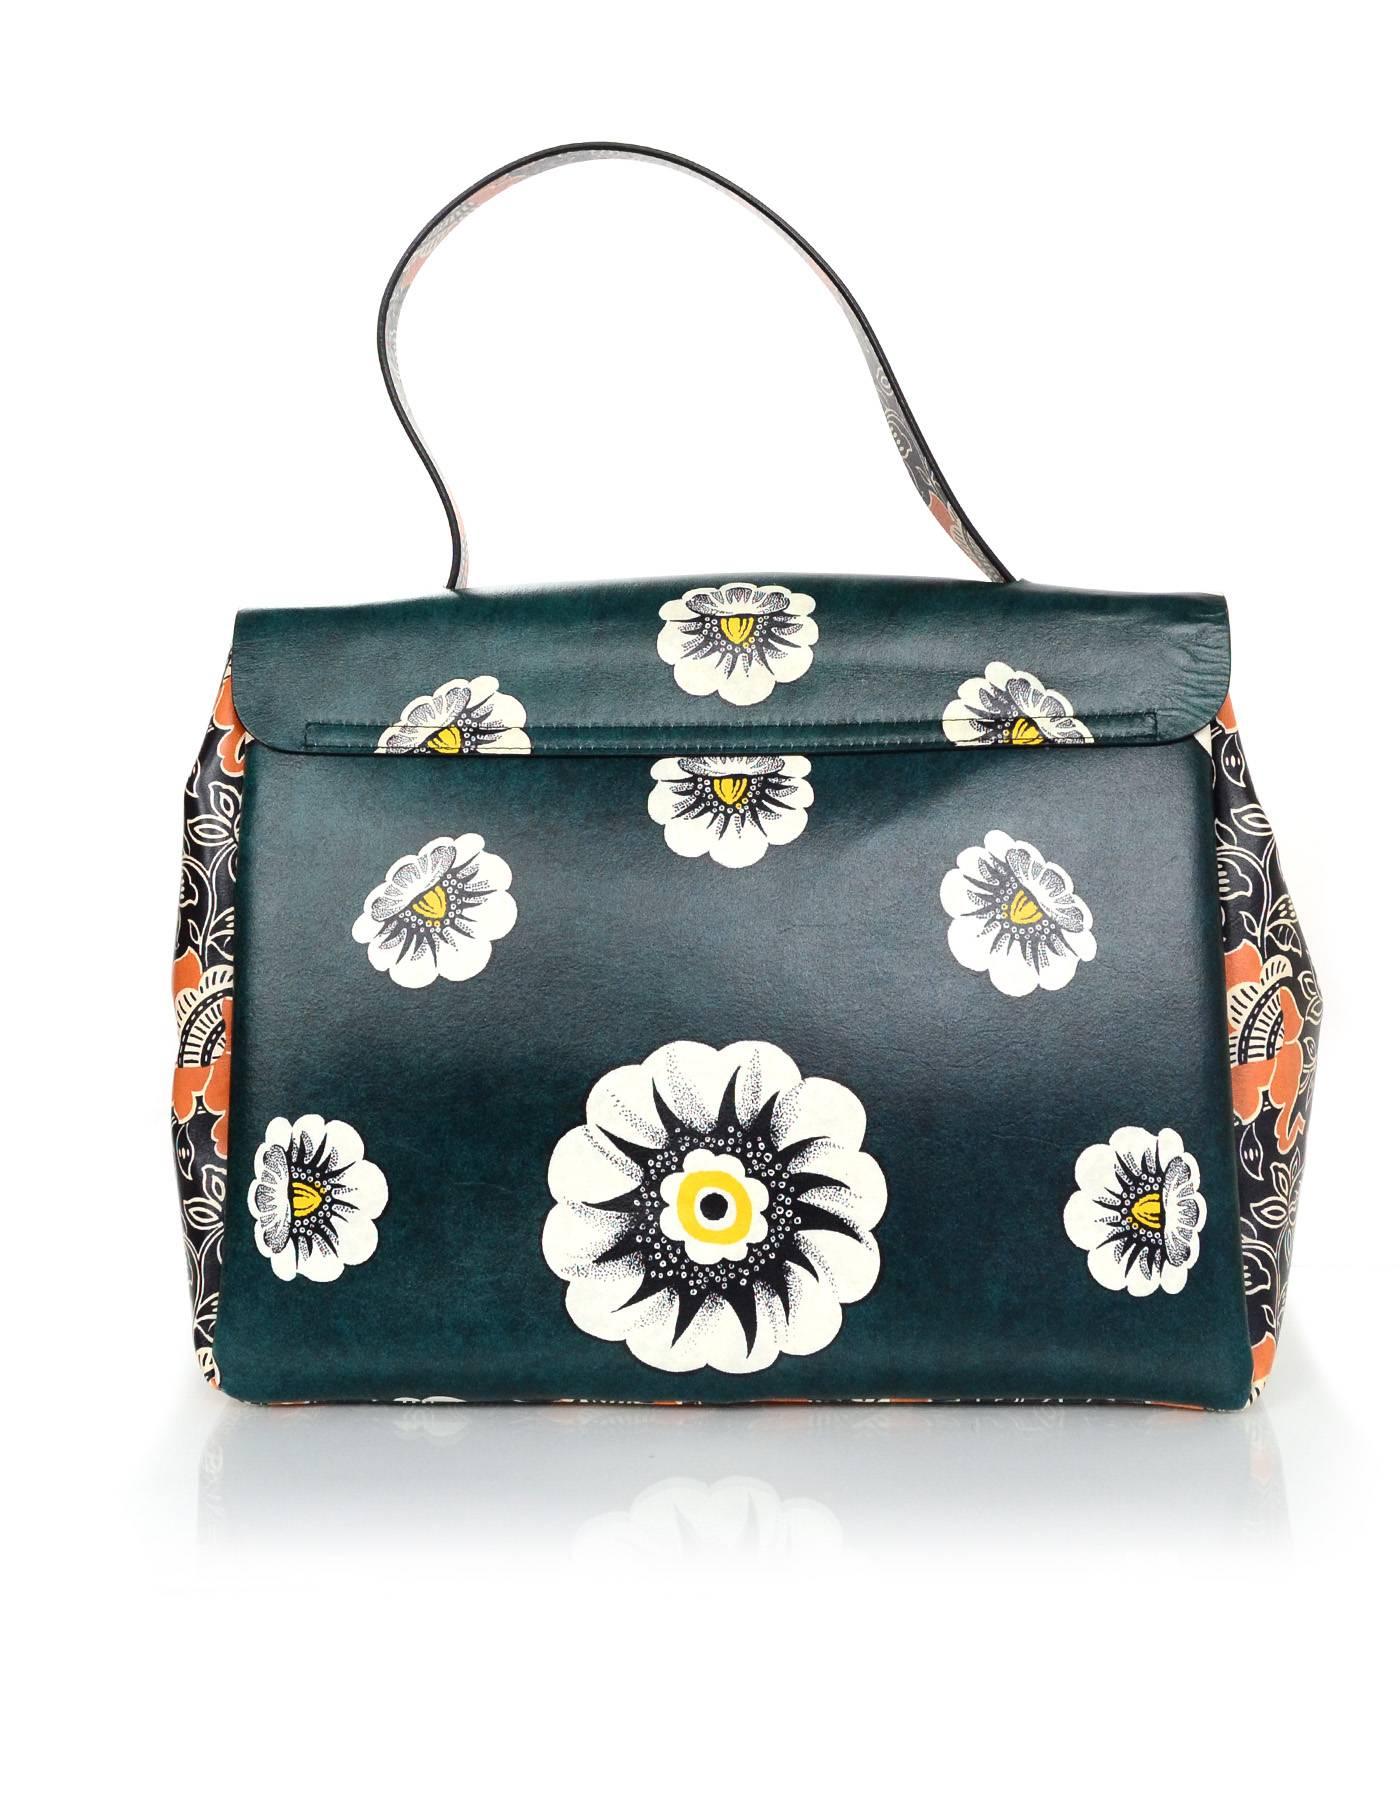 Valentino Multicolor Floral Print Mime Top Handle Bag

Made In: Italy
Year of Production: 2015
Color: Multi-colored
Hardware: Silvertone
Materials: Leather
Lining: Beige leather
Closure/Opening: Flap top with S-lock closure
Exterior Pockets: